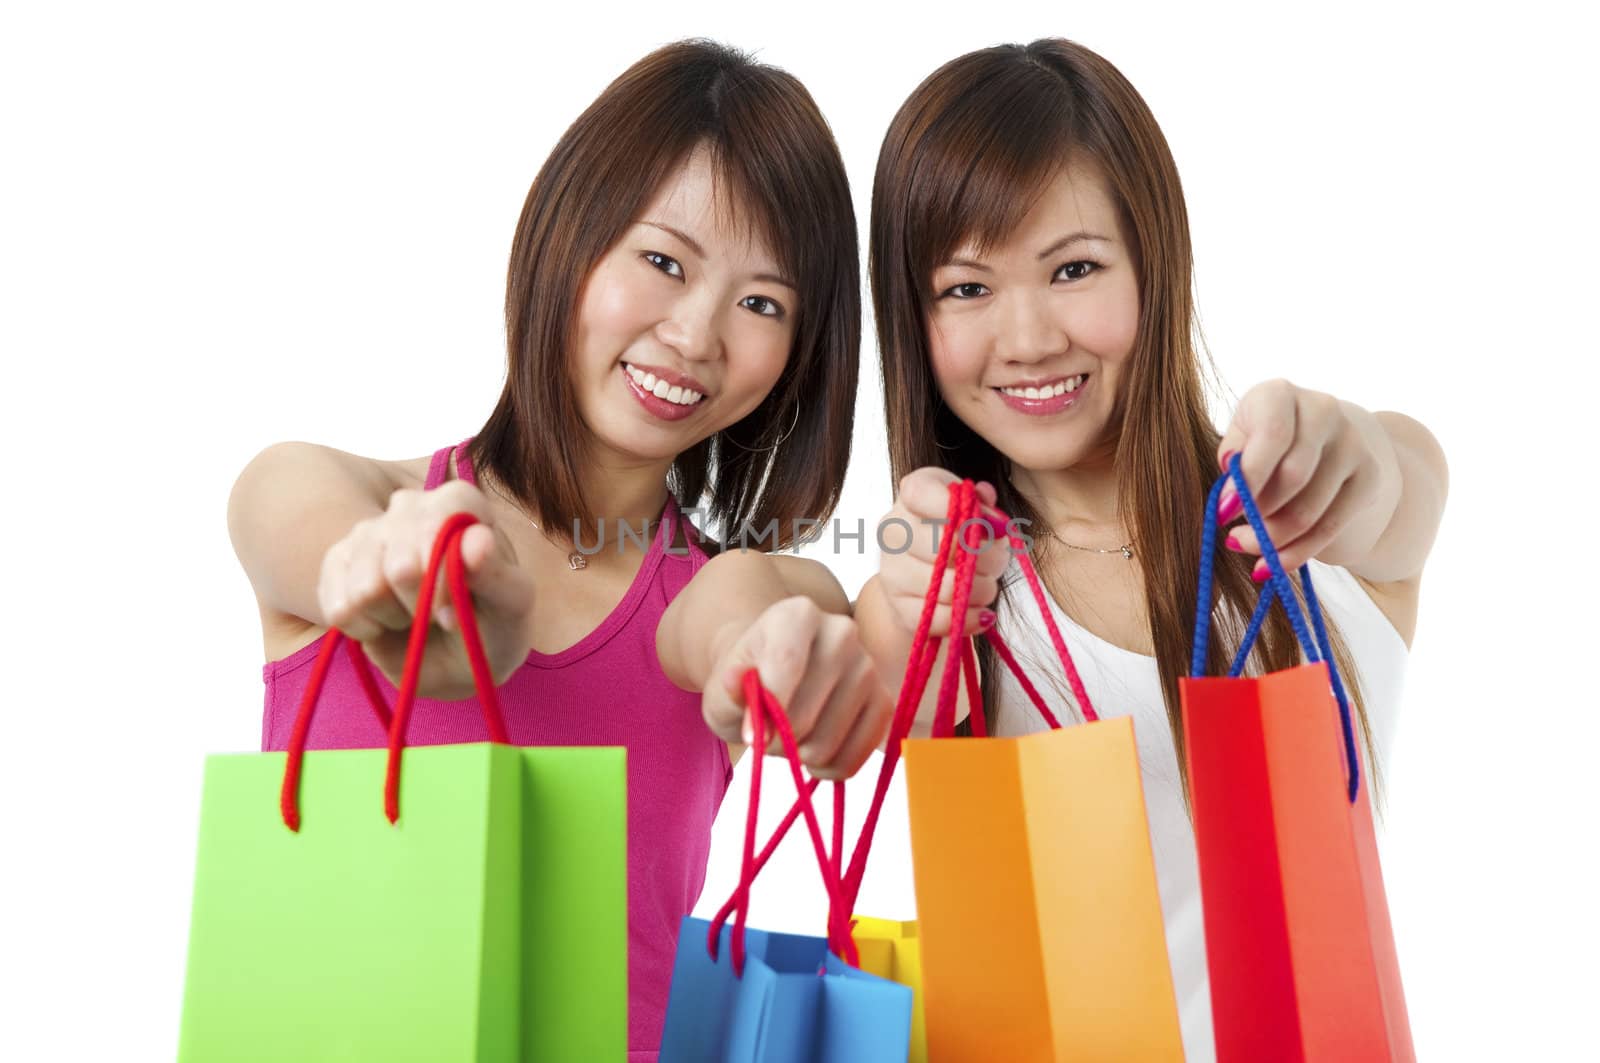 Happy Asian girls showing their shopping bags against white background.